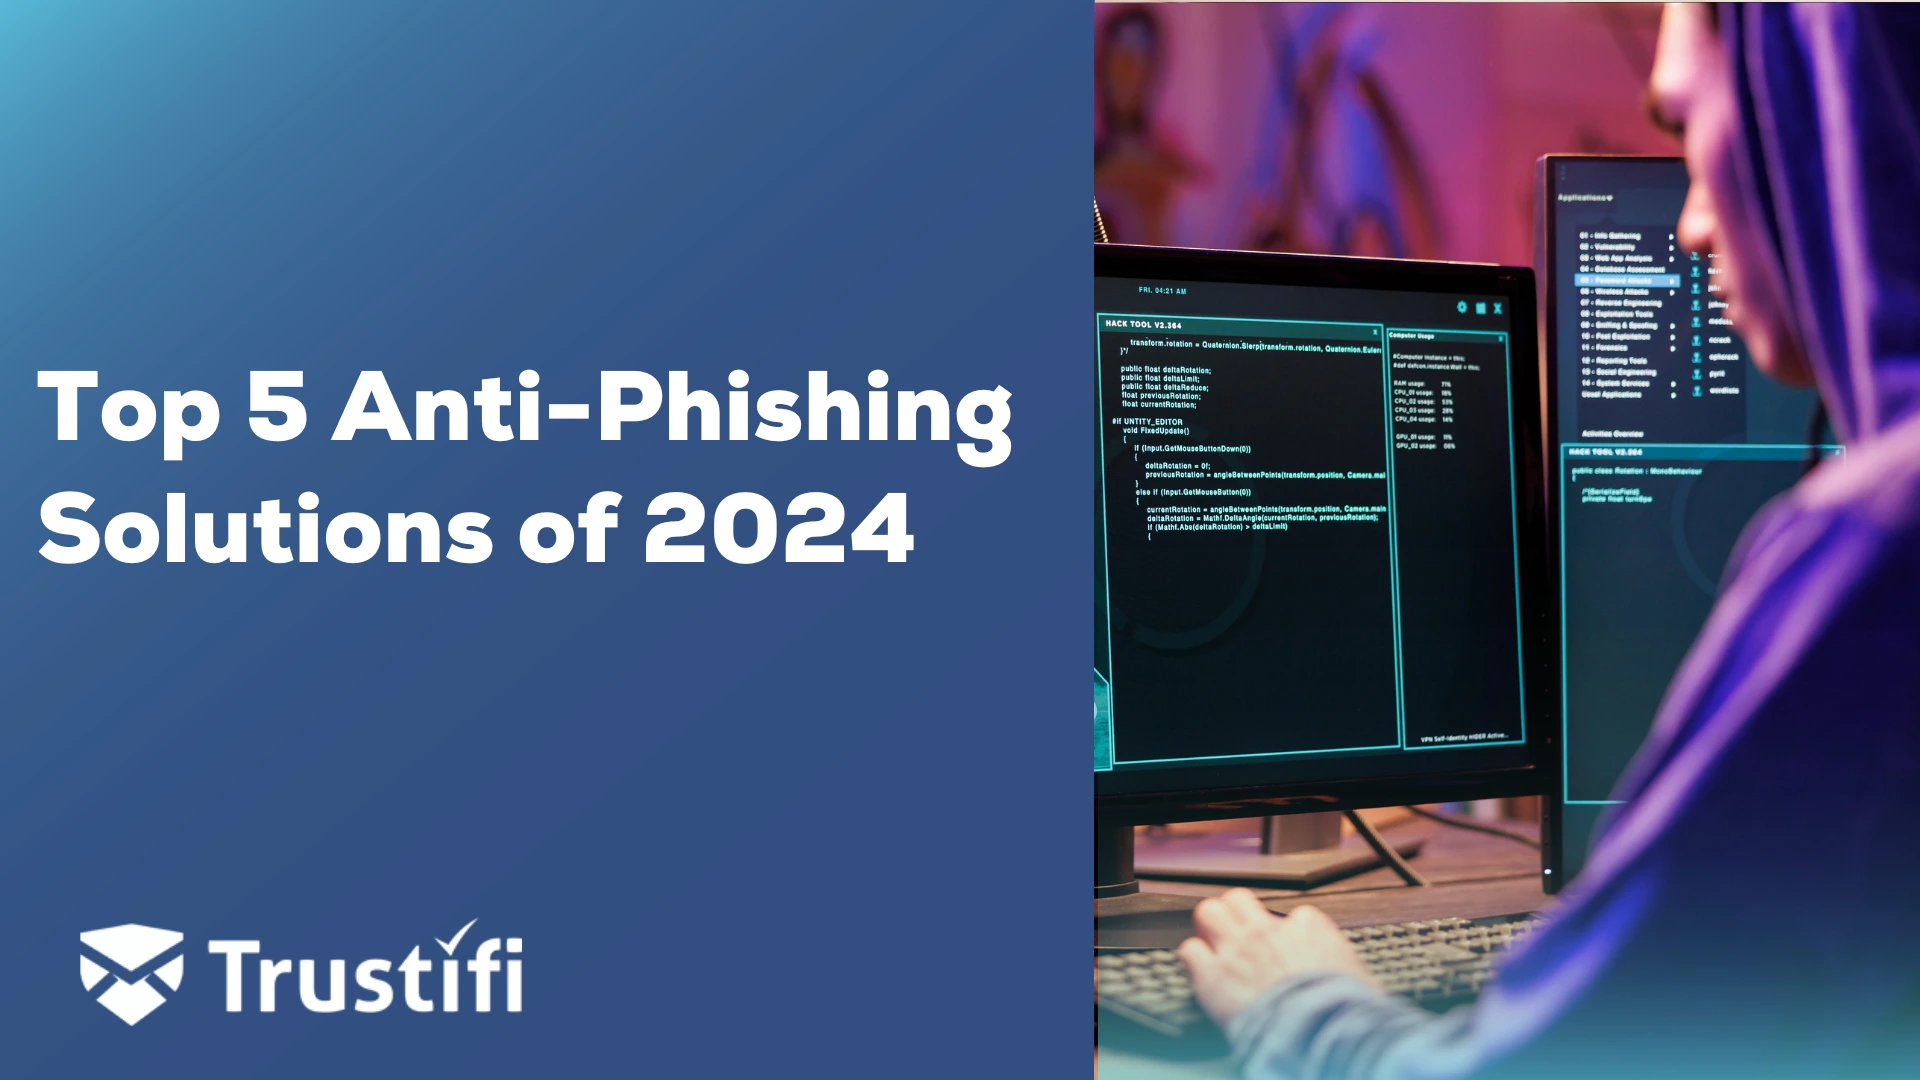 What Are The Top 5 Anti-Phishing Solutions of 2024?